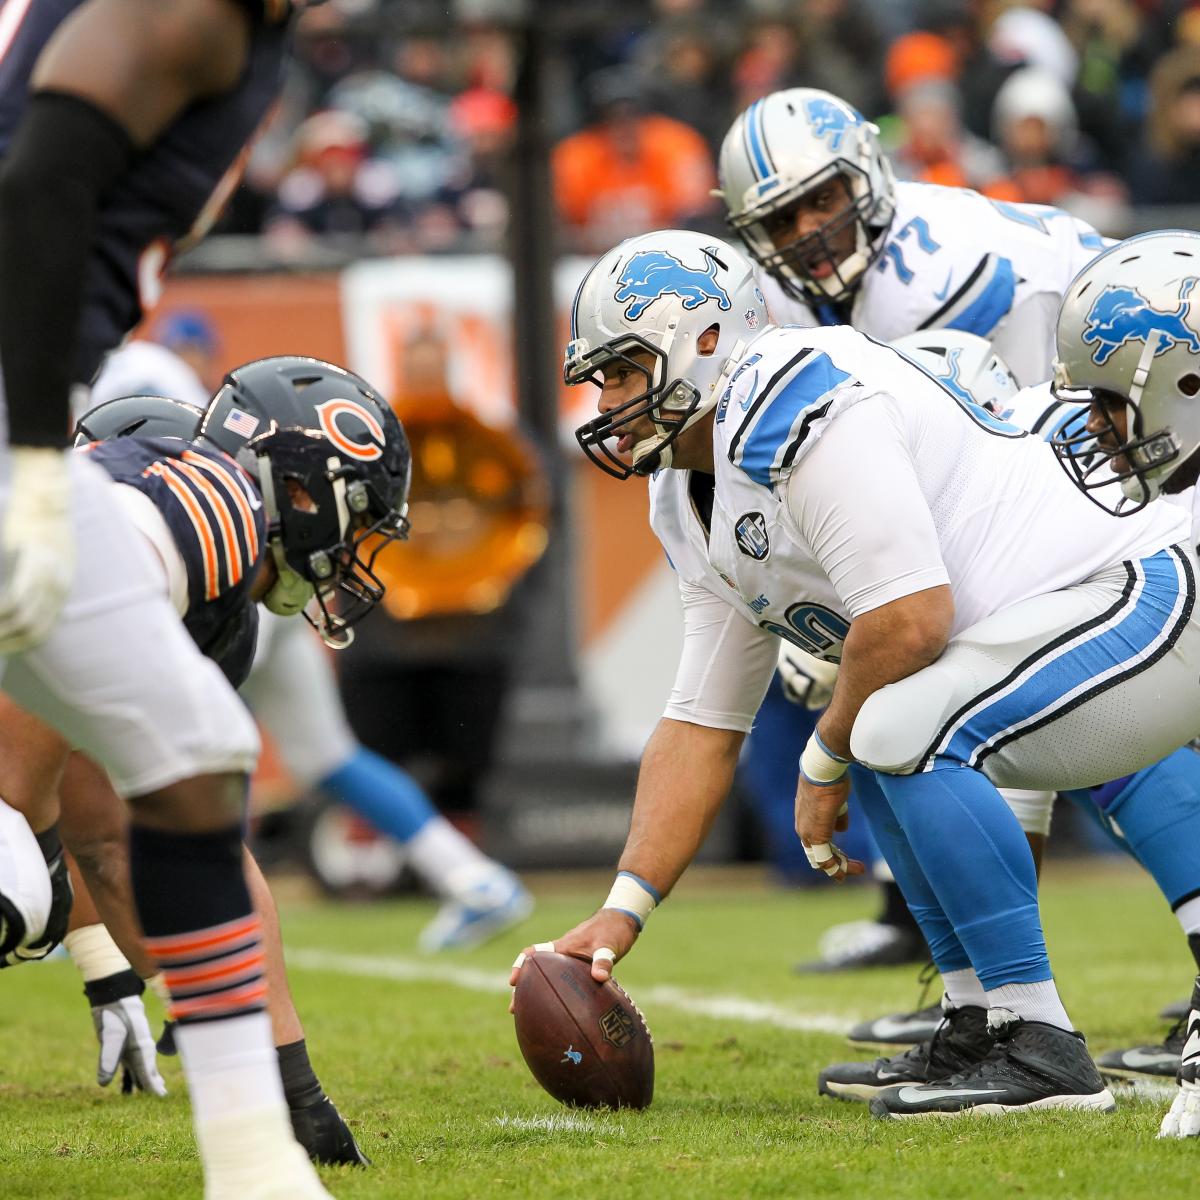 Detroit Lions vs. Chicago Bears Video Highlights and Recap from Week